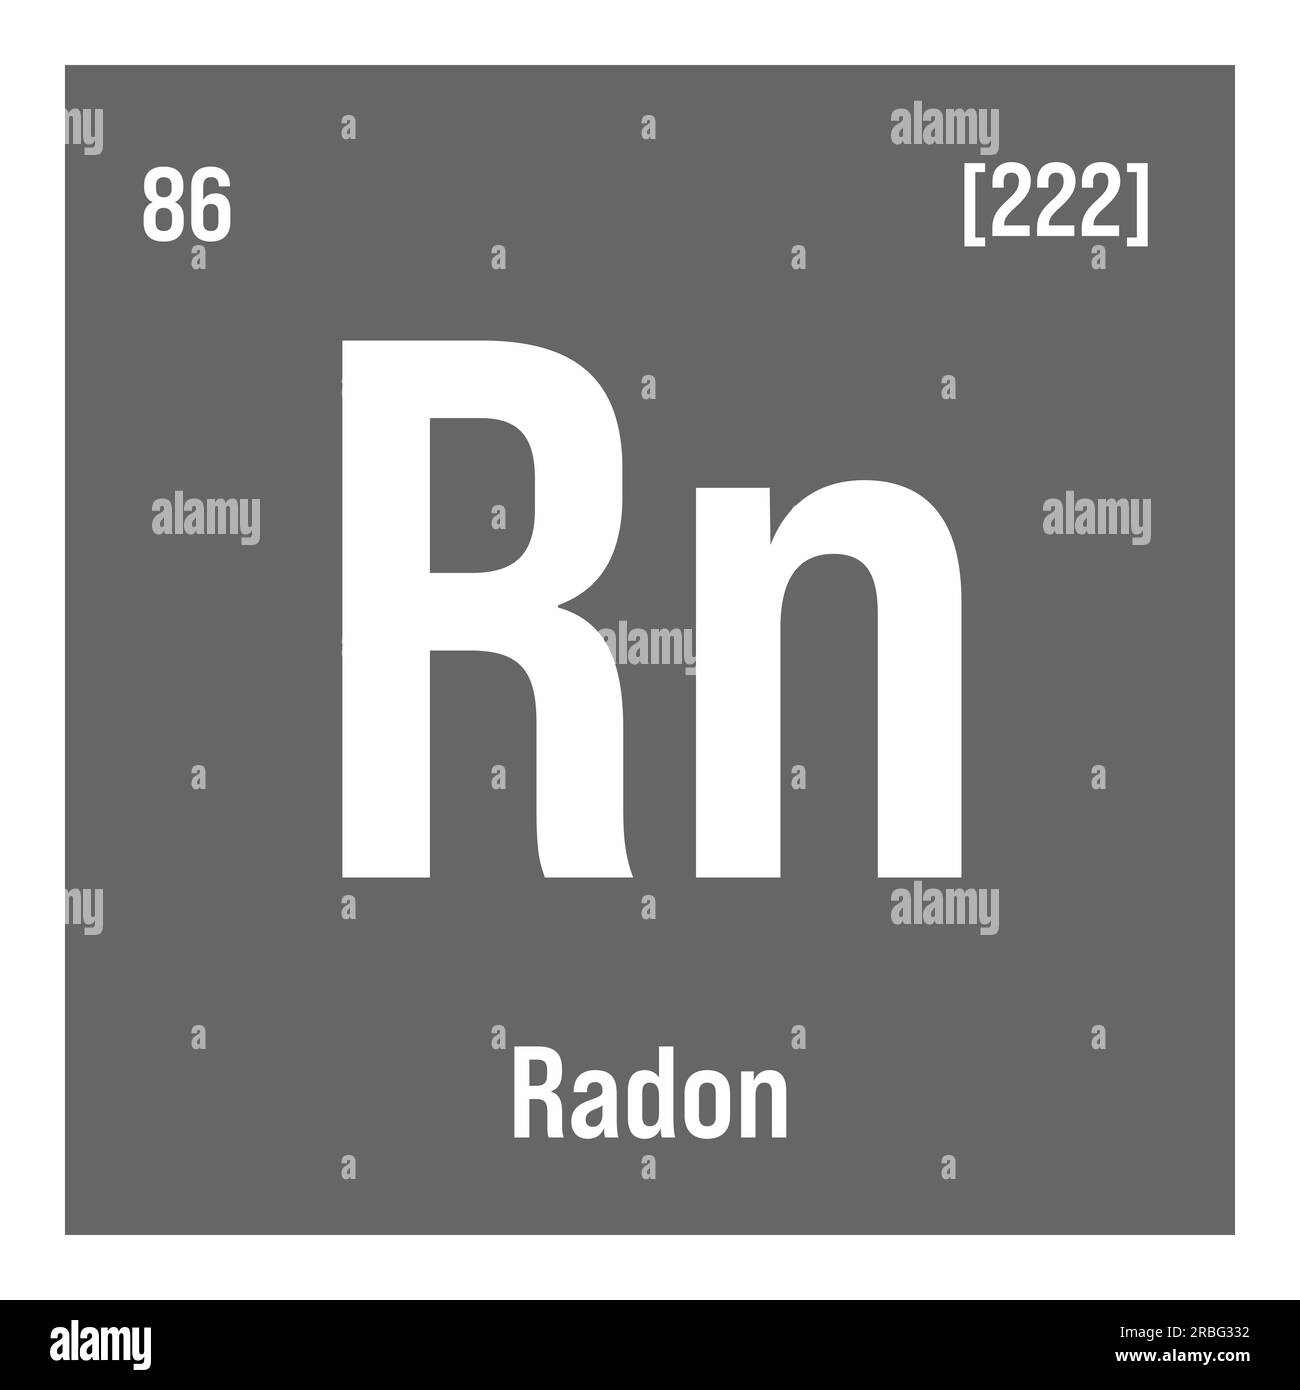 Radon, Rn, periodic table element with name, symbol, atomic number and weight. Inert gas with radioactive properties, used in scientific research and as a tracer in certain types of experiments. Stock Vector